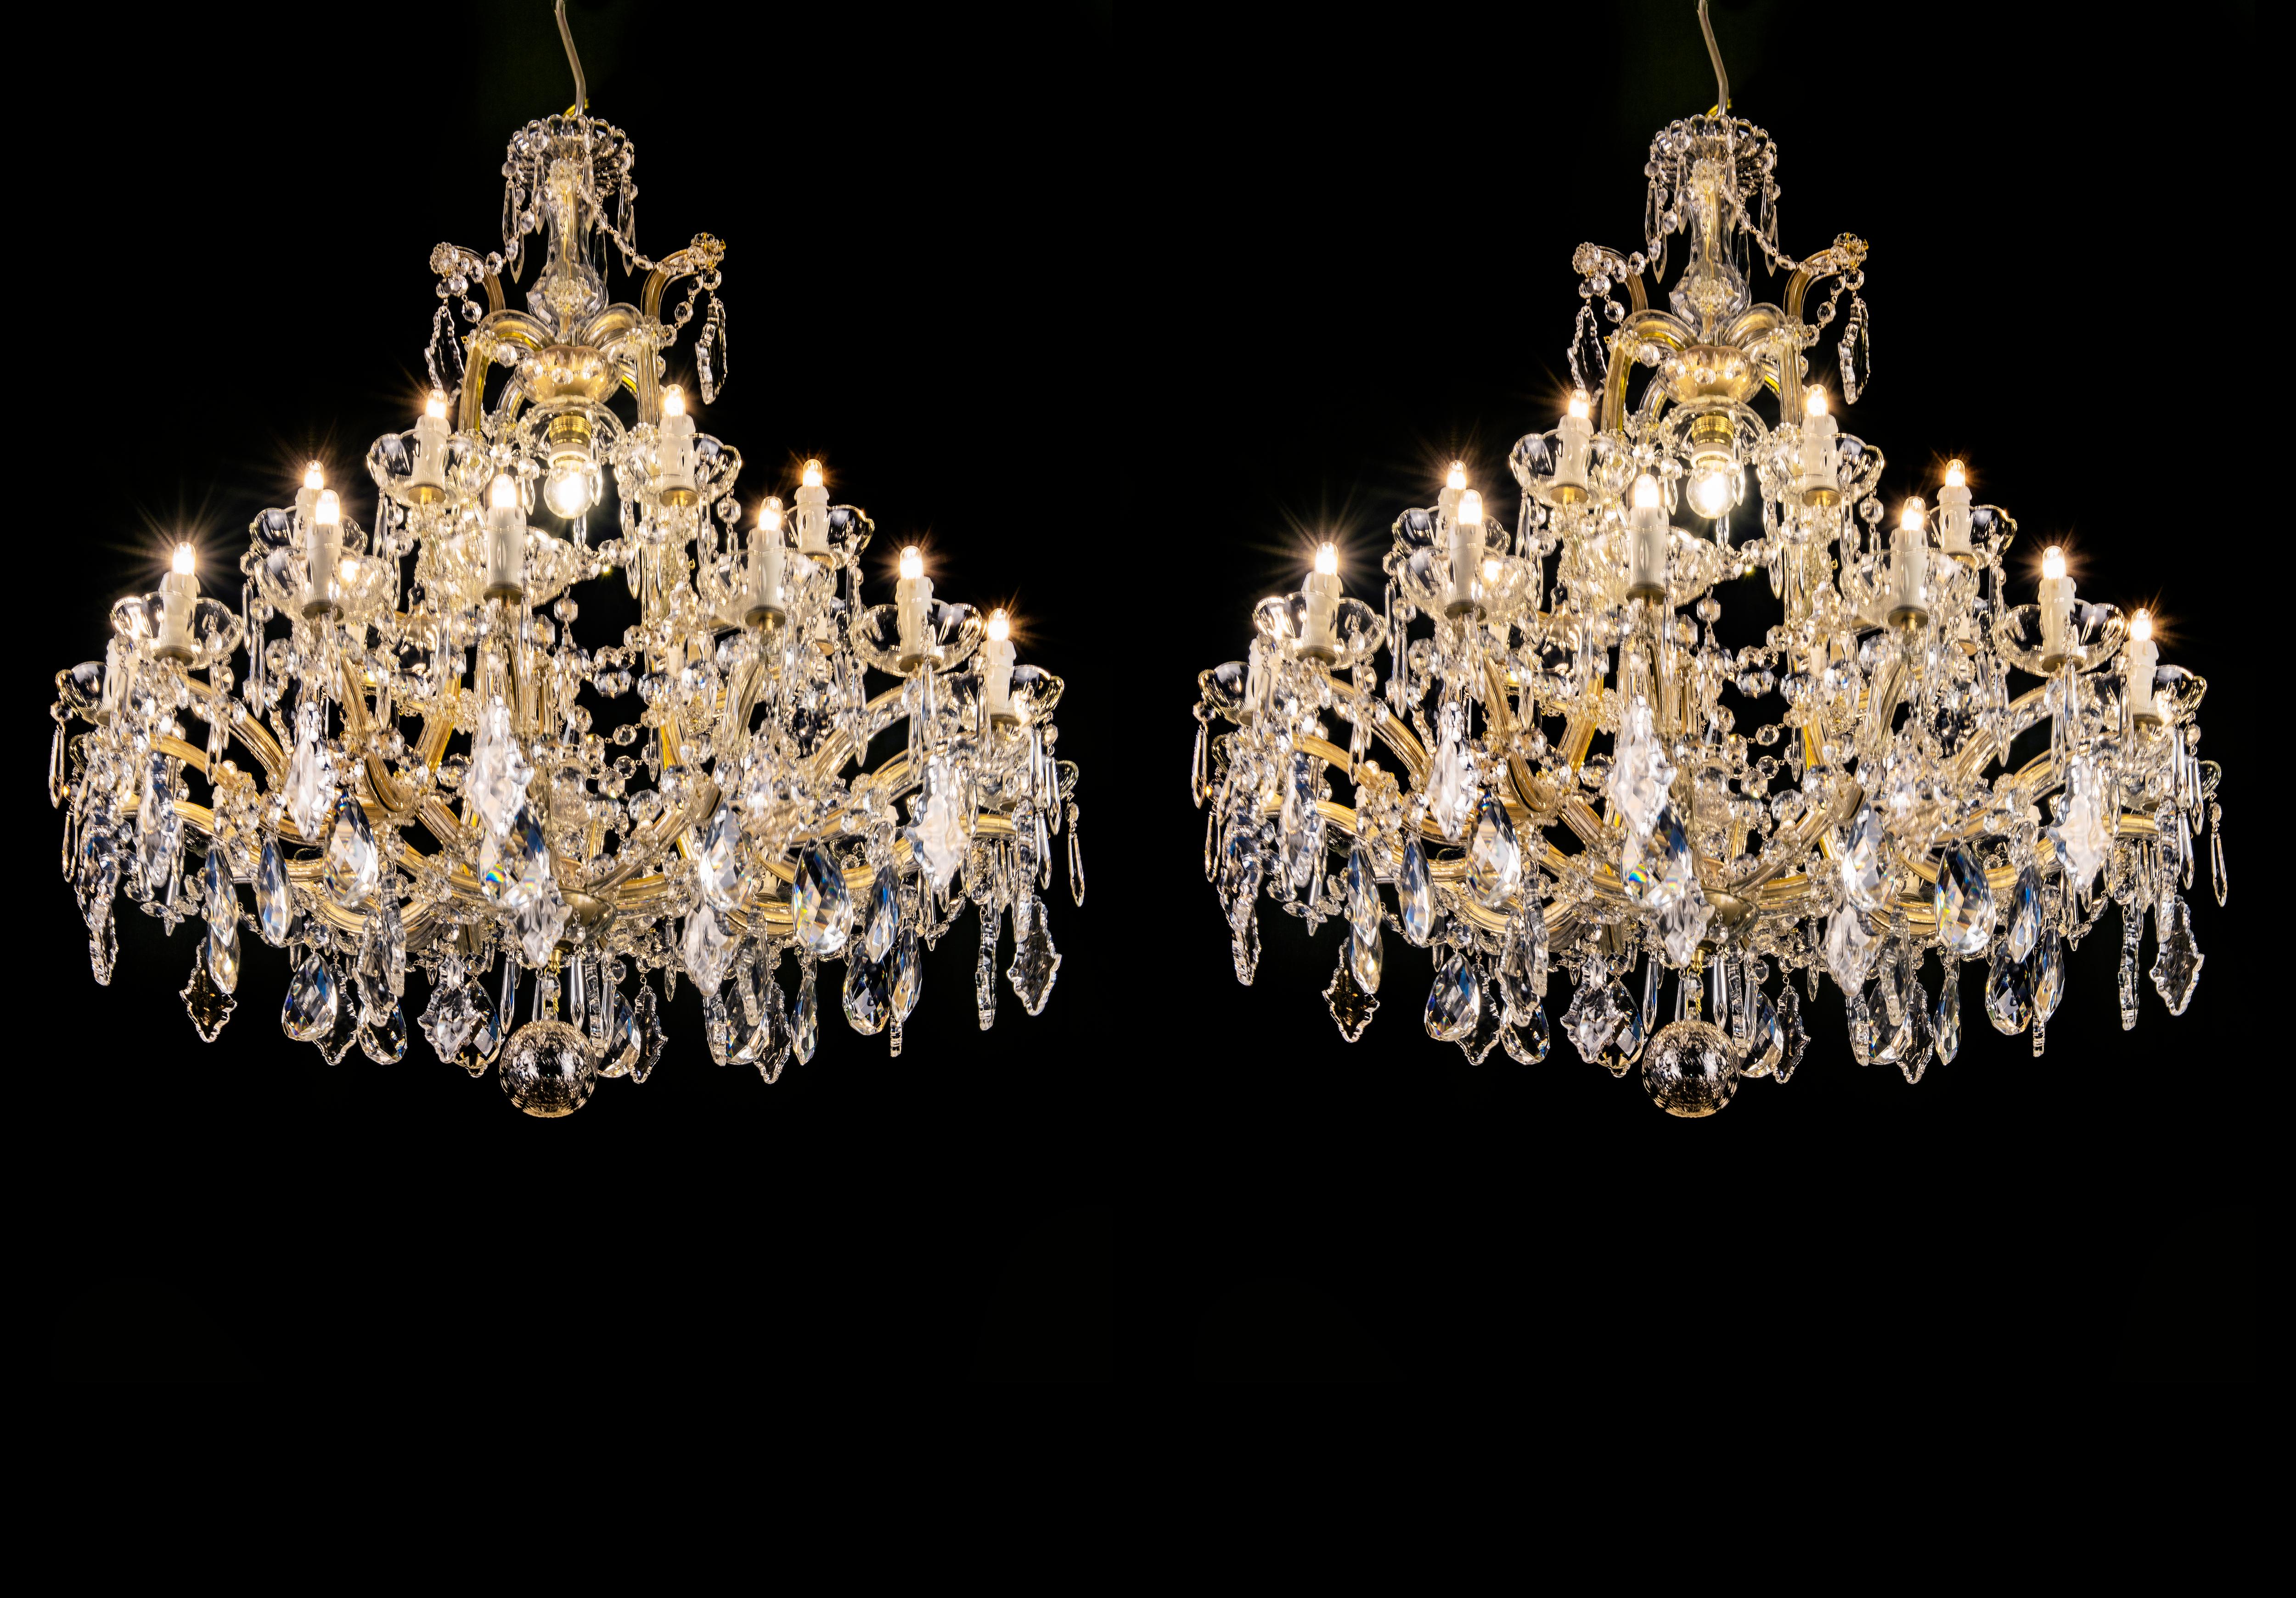 Gorgeous pair of Italian Marie Therese twenty five-light crystal chandeliers with a shaped central stem surmounted by beautifully contoured scrolling arms. These lovely two-tier chandeliers are in good condition and come from a private palazzo of